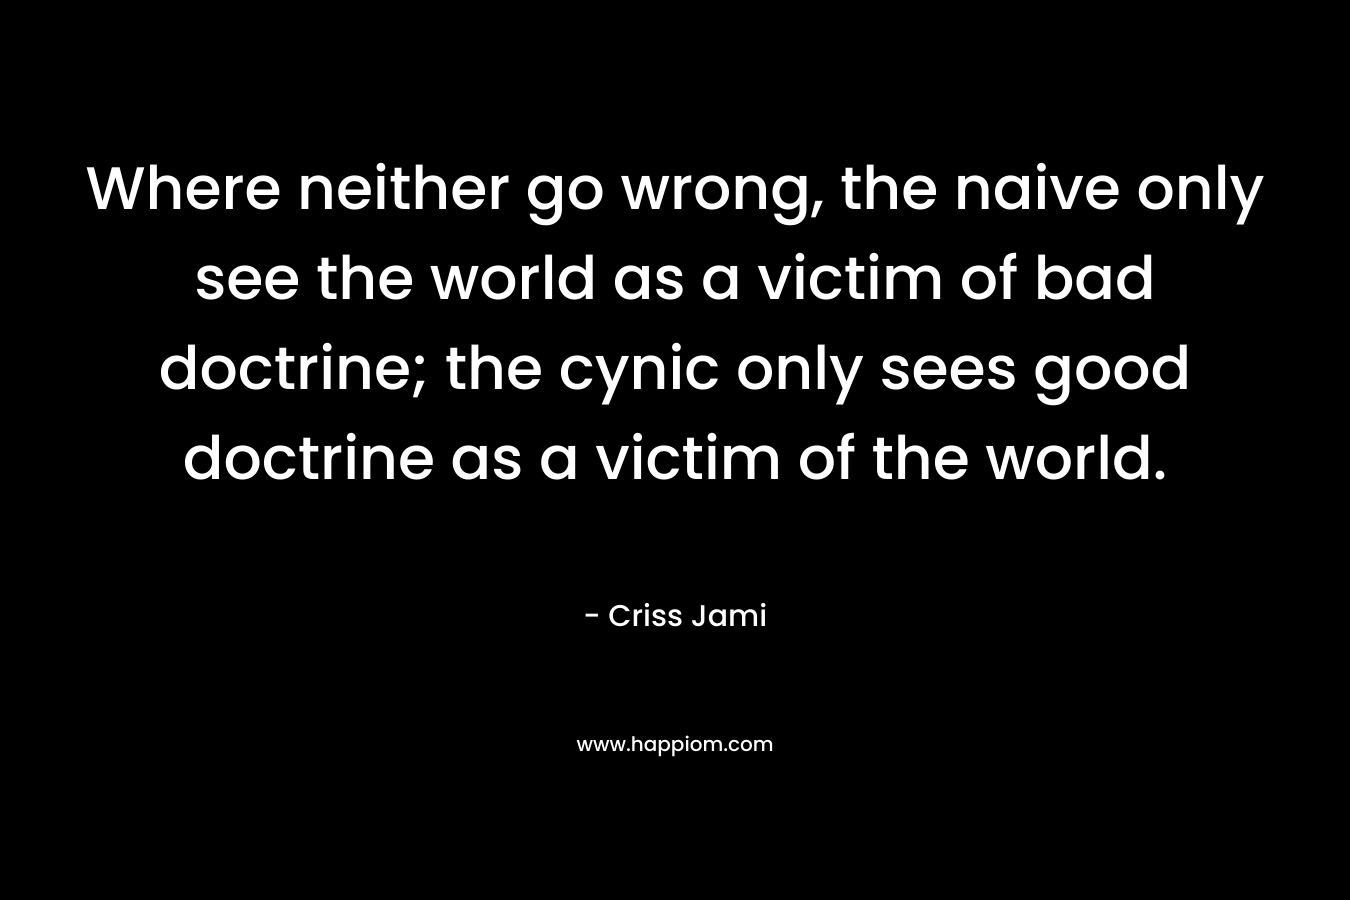 Where neither go wrong, the naive only see the world as a victim of bad doctrine; the cynic only sees good doctrine as a victim of the world.